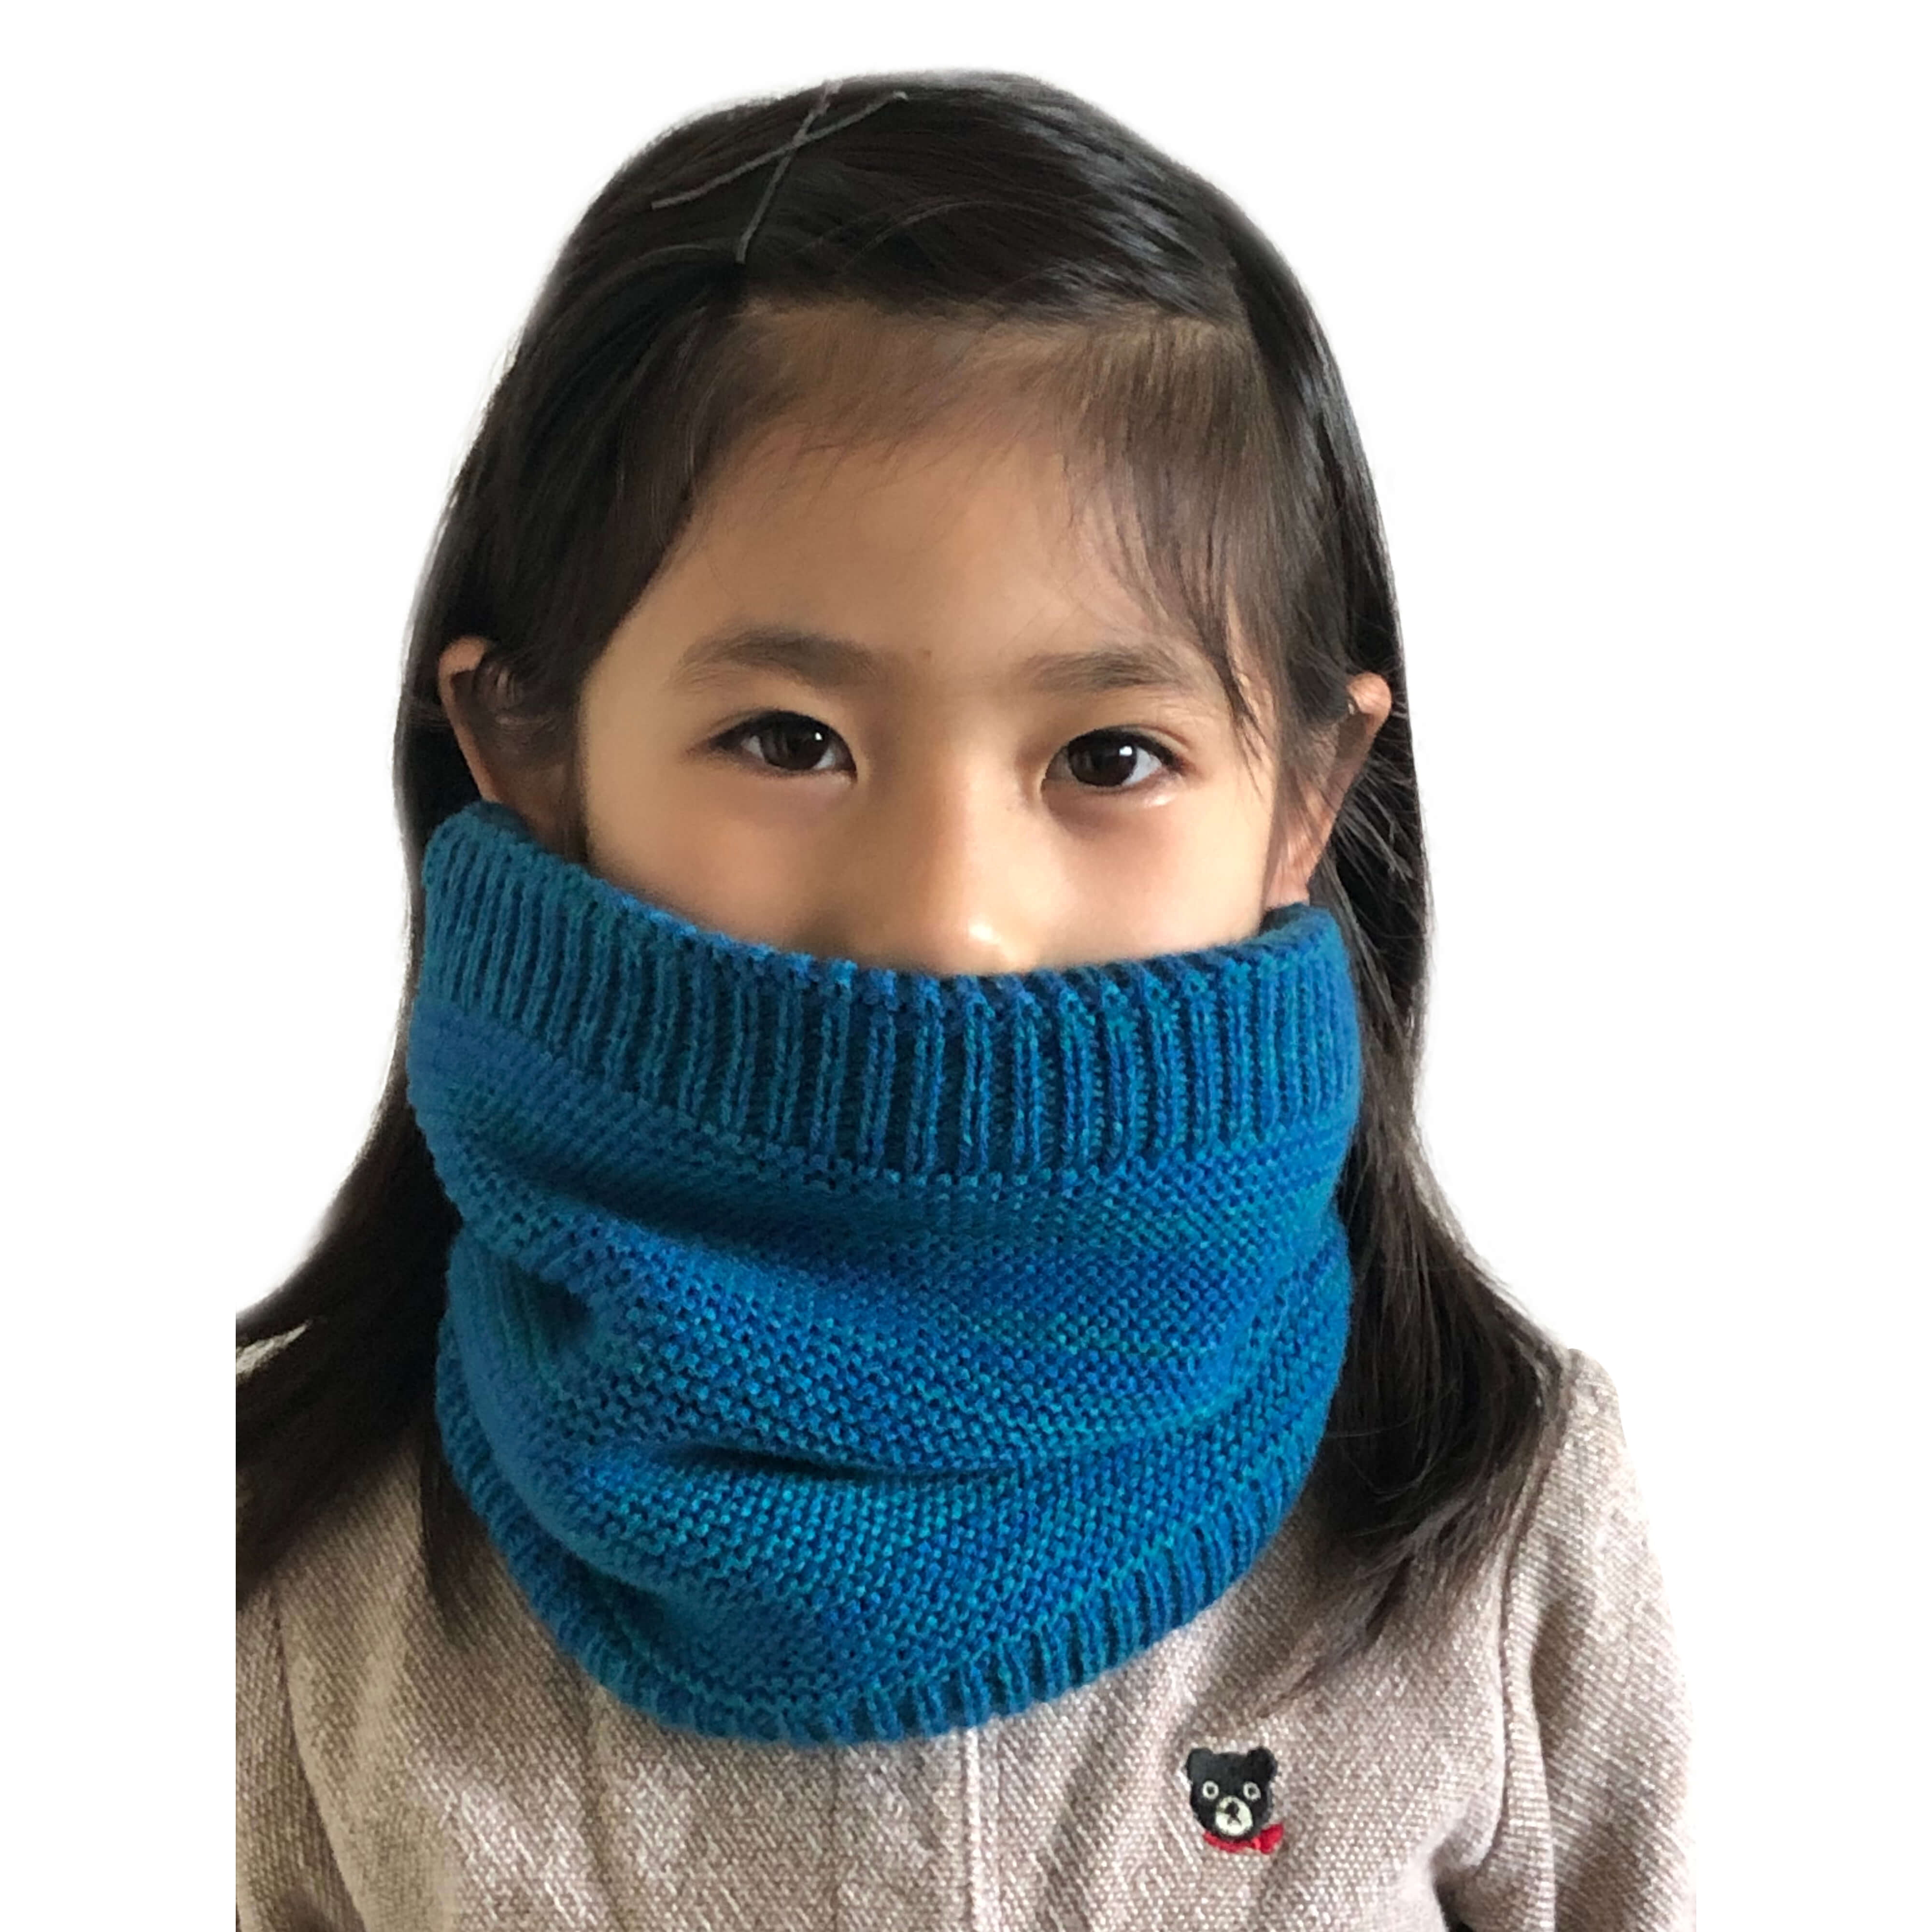 Warmer Old) Year Kids (Heather Knit Tube (Preschoolers Neck Furry to Scarf 12 for Inside Winter Gray)